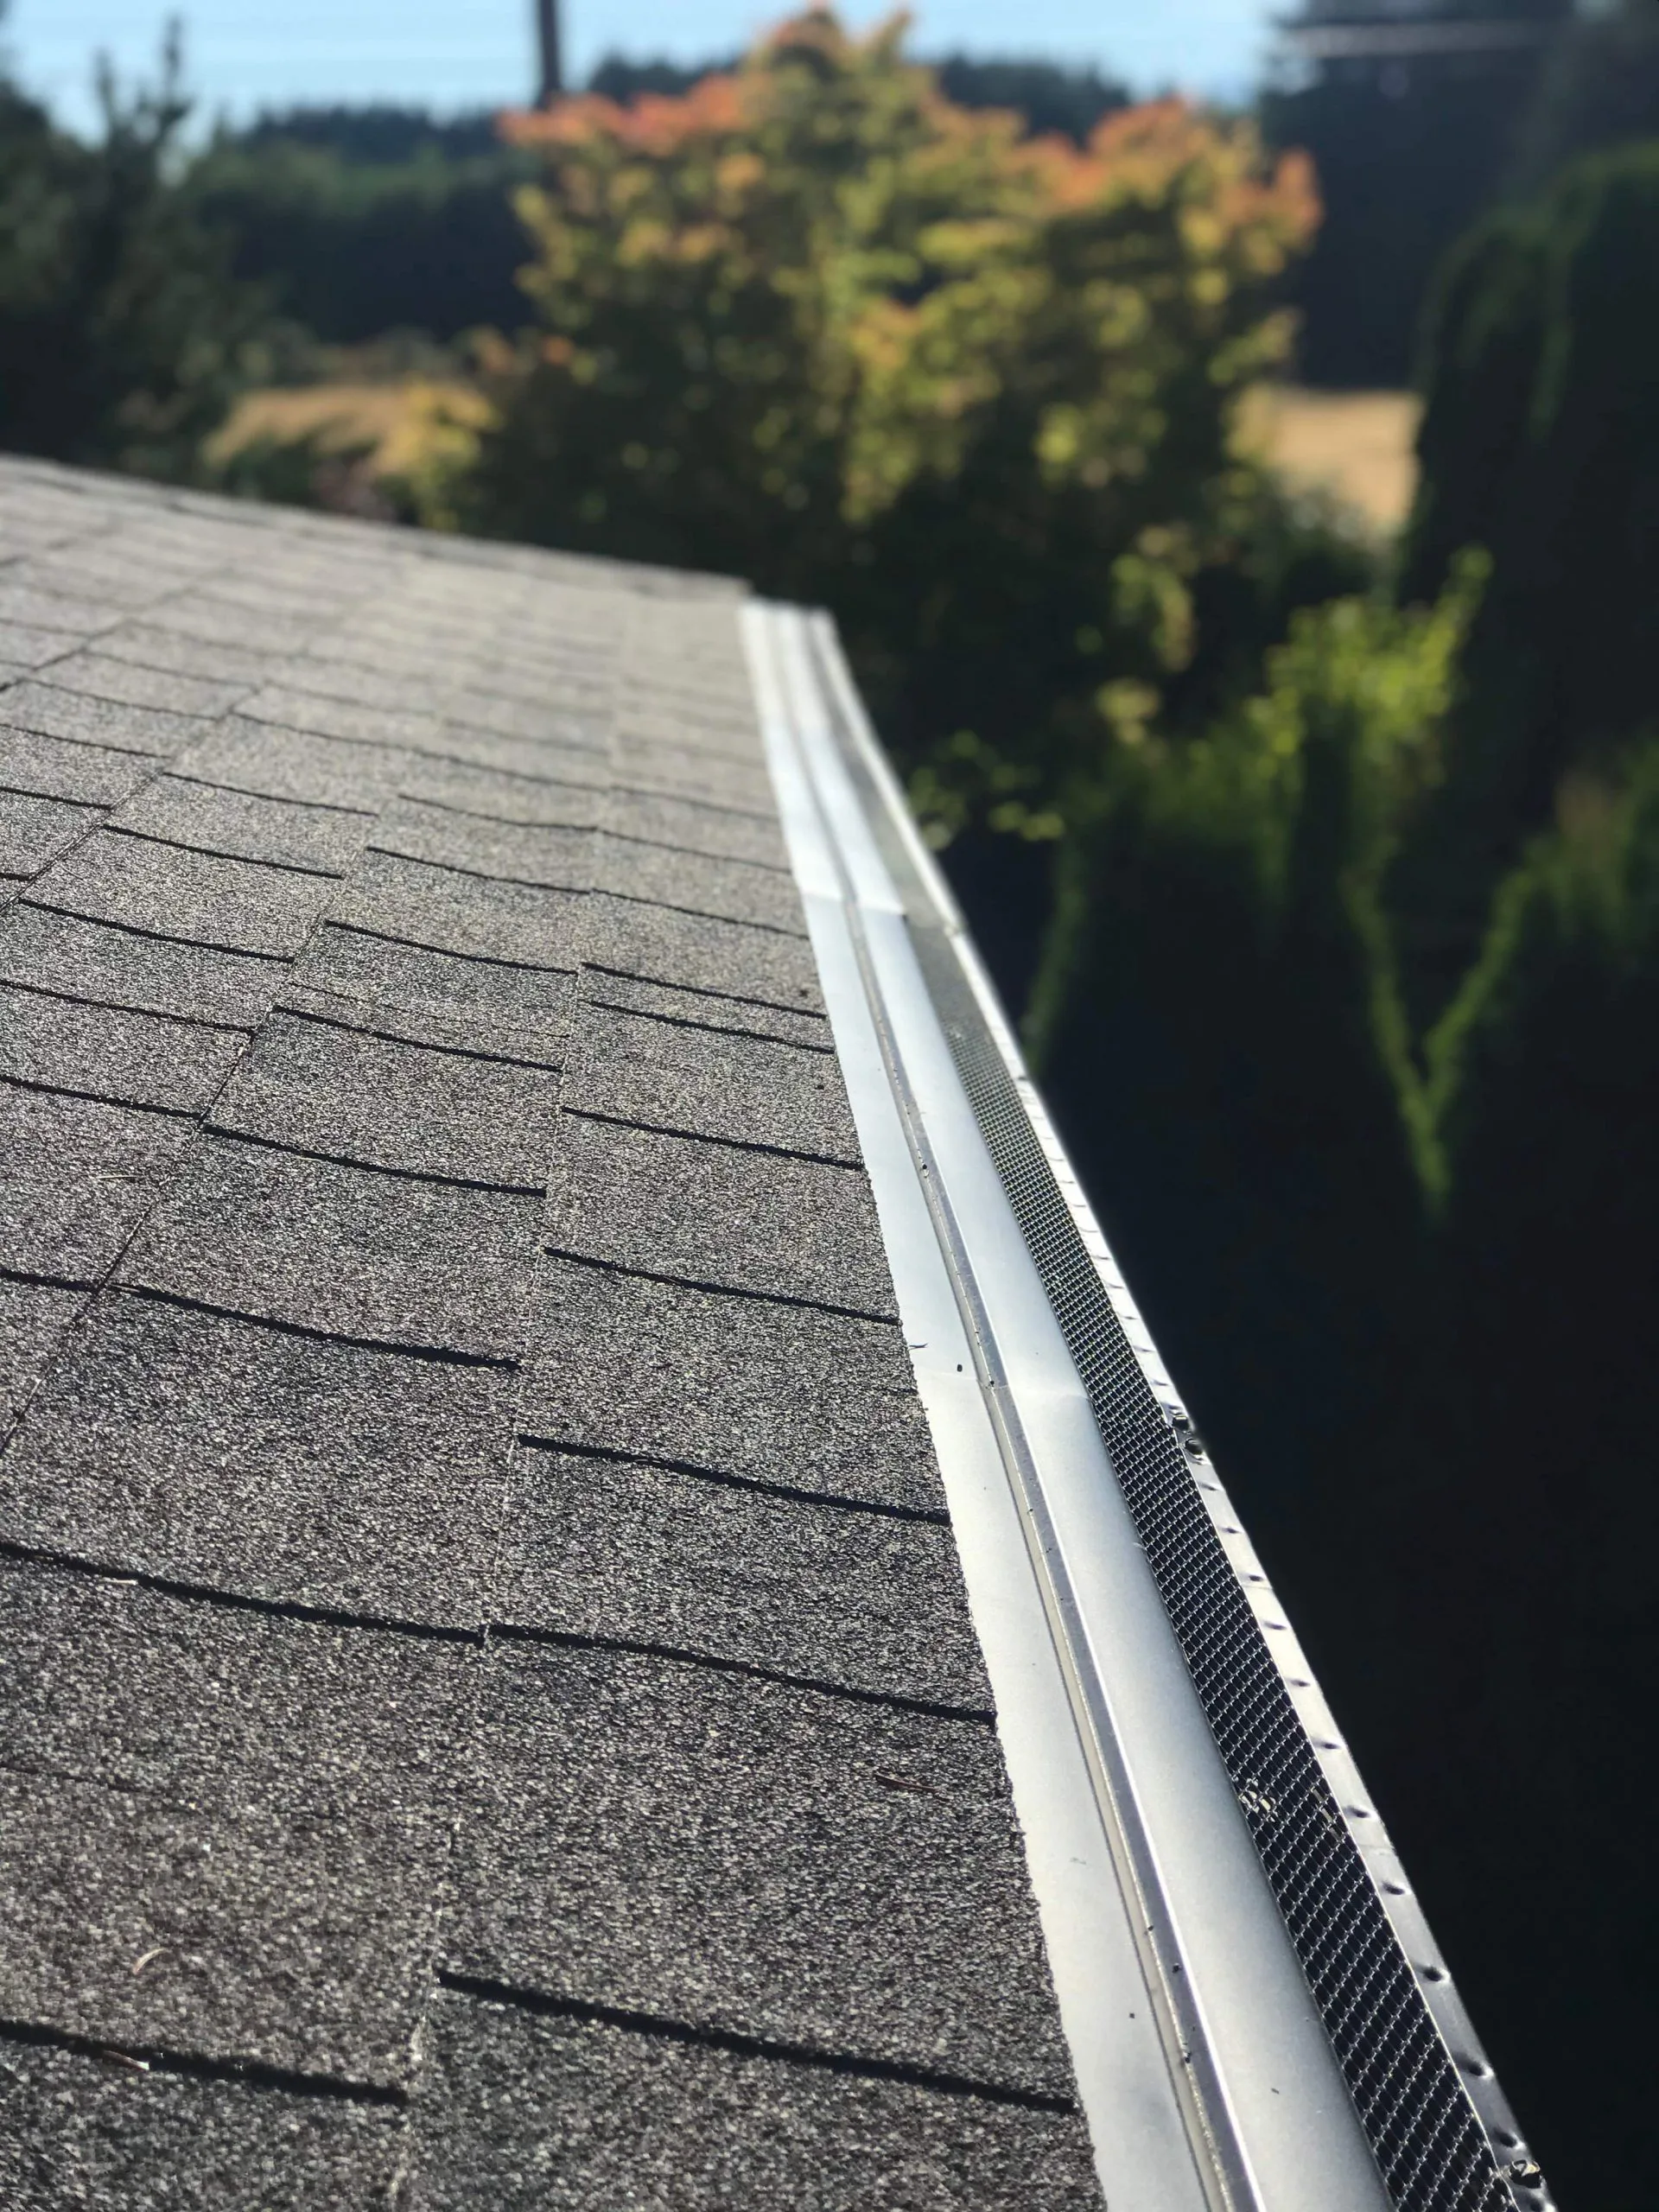 Premier gutters and gutter covers attached to an Asphalt shingle roof.